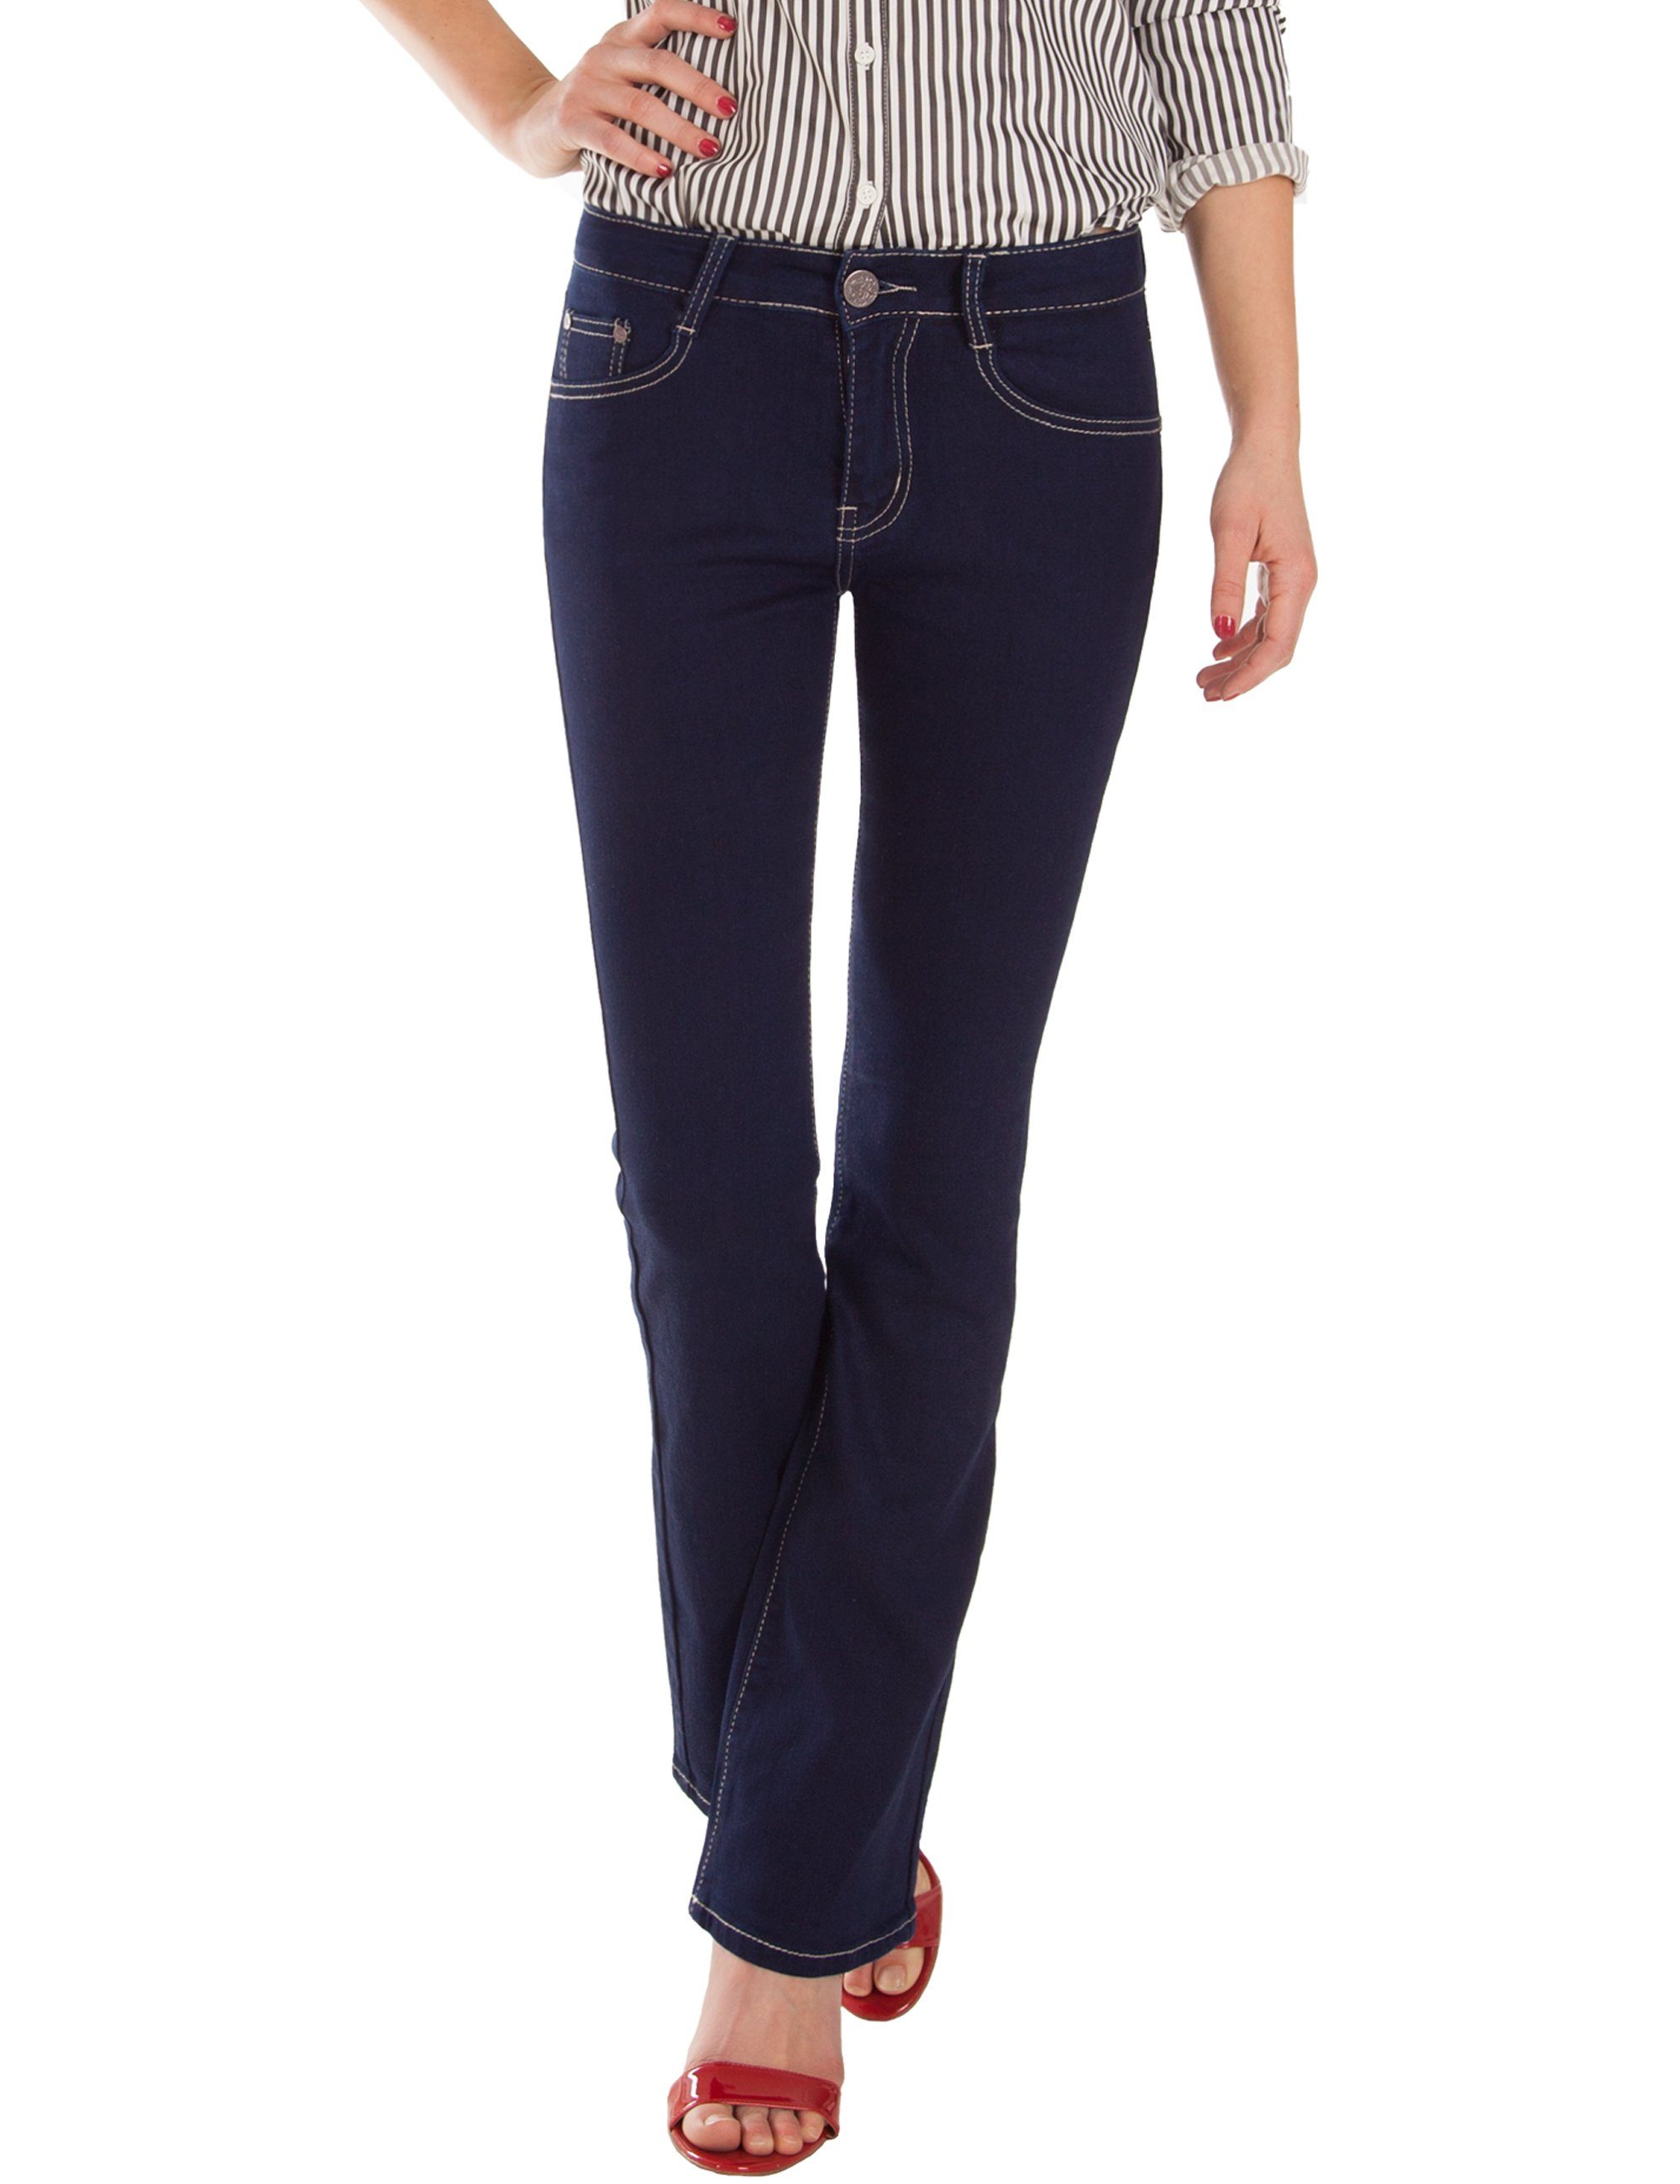 Normal Waist 5-Pocket-Style, Stretch, Fraternel Blau Bootcut-Jeans